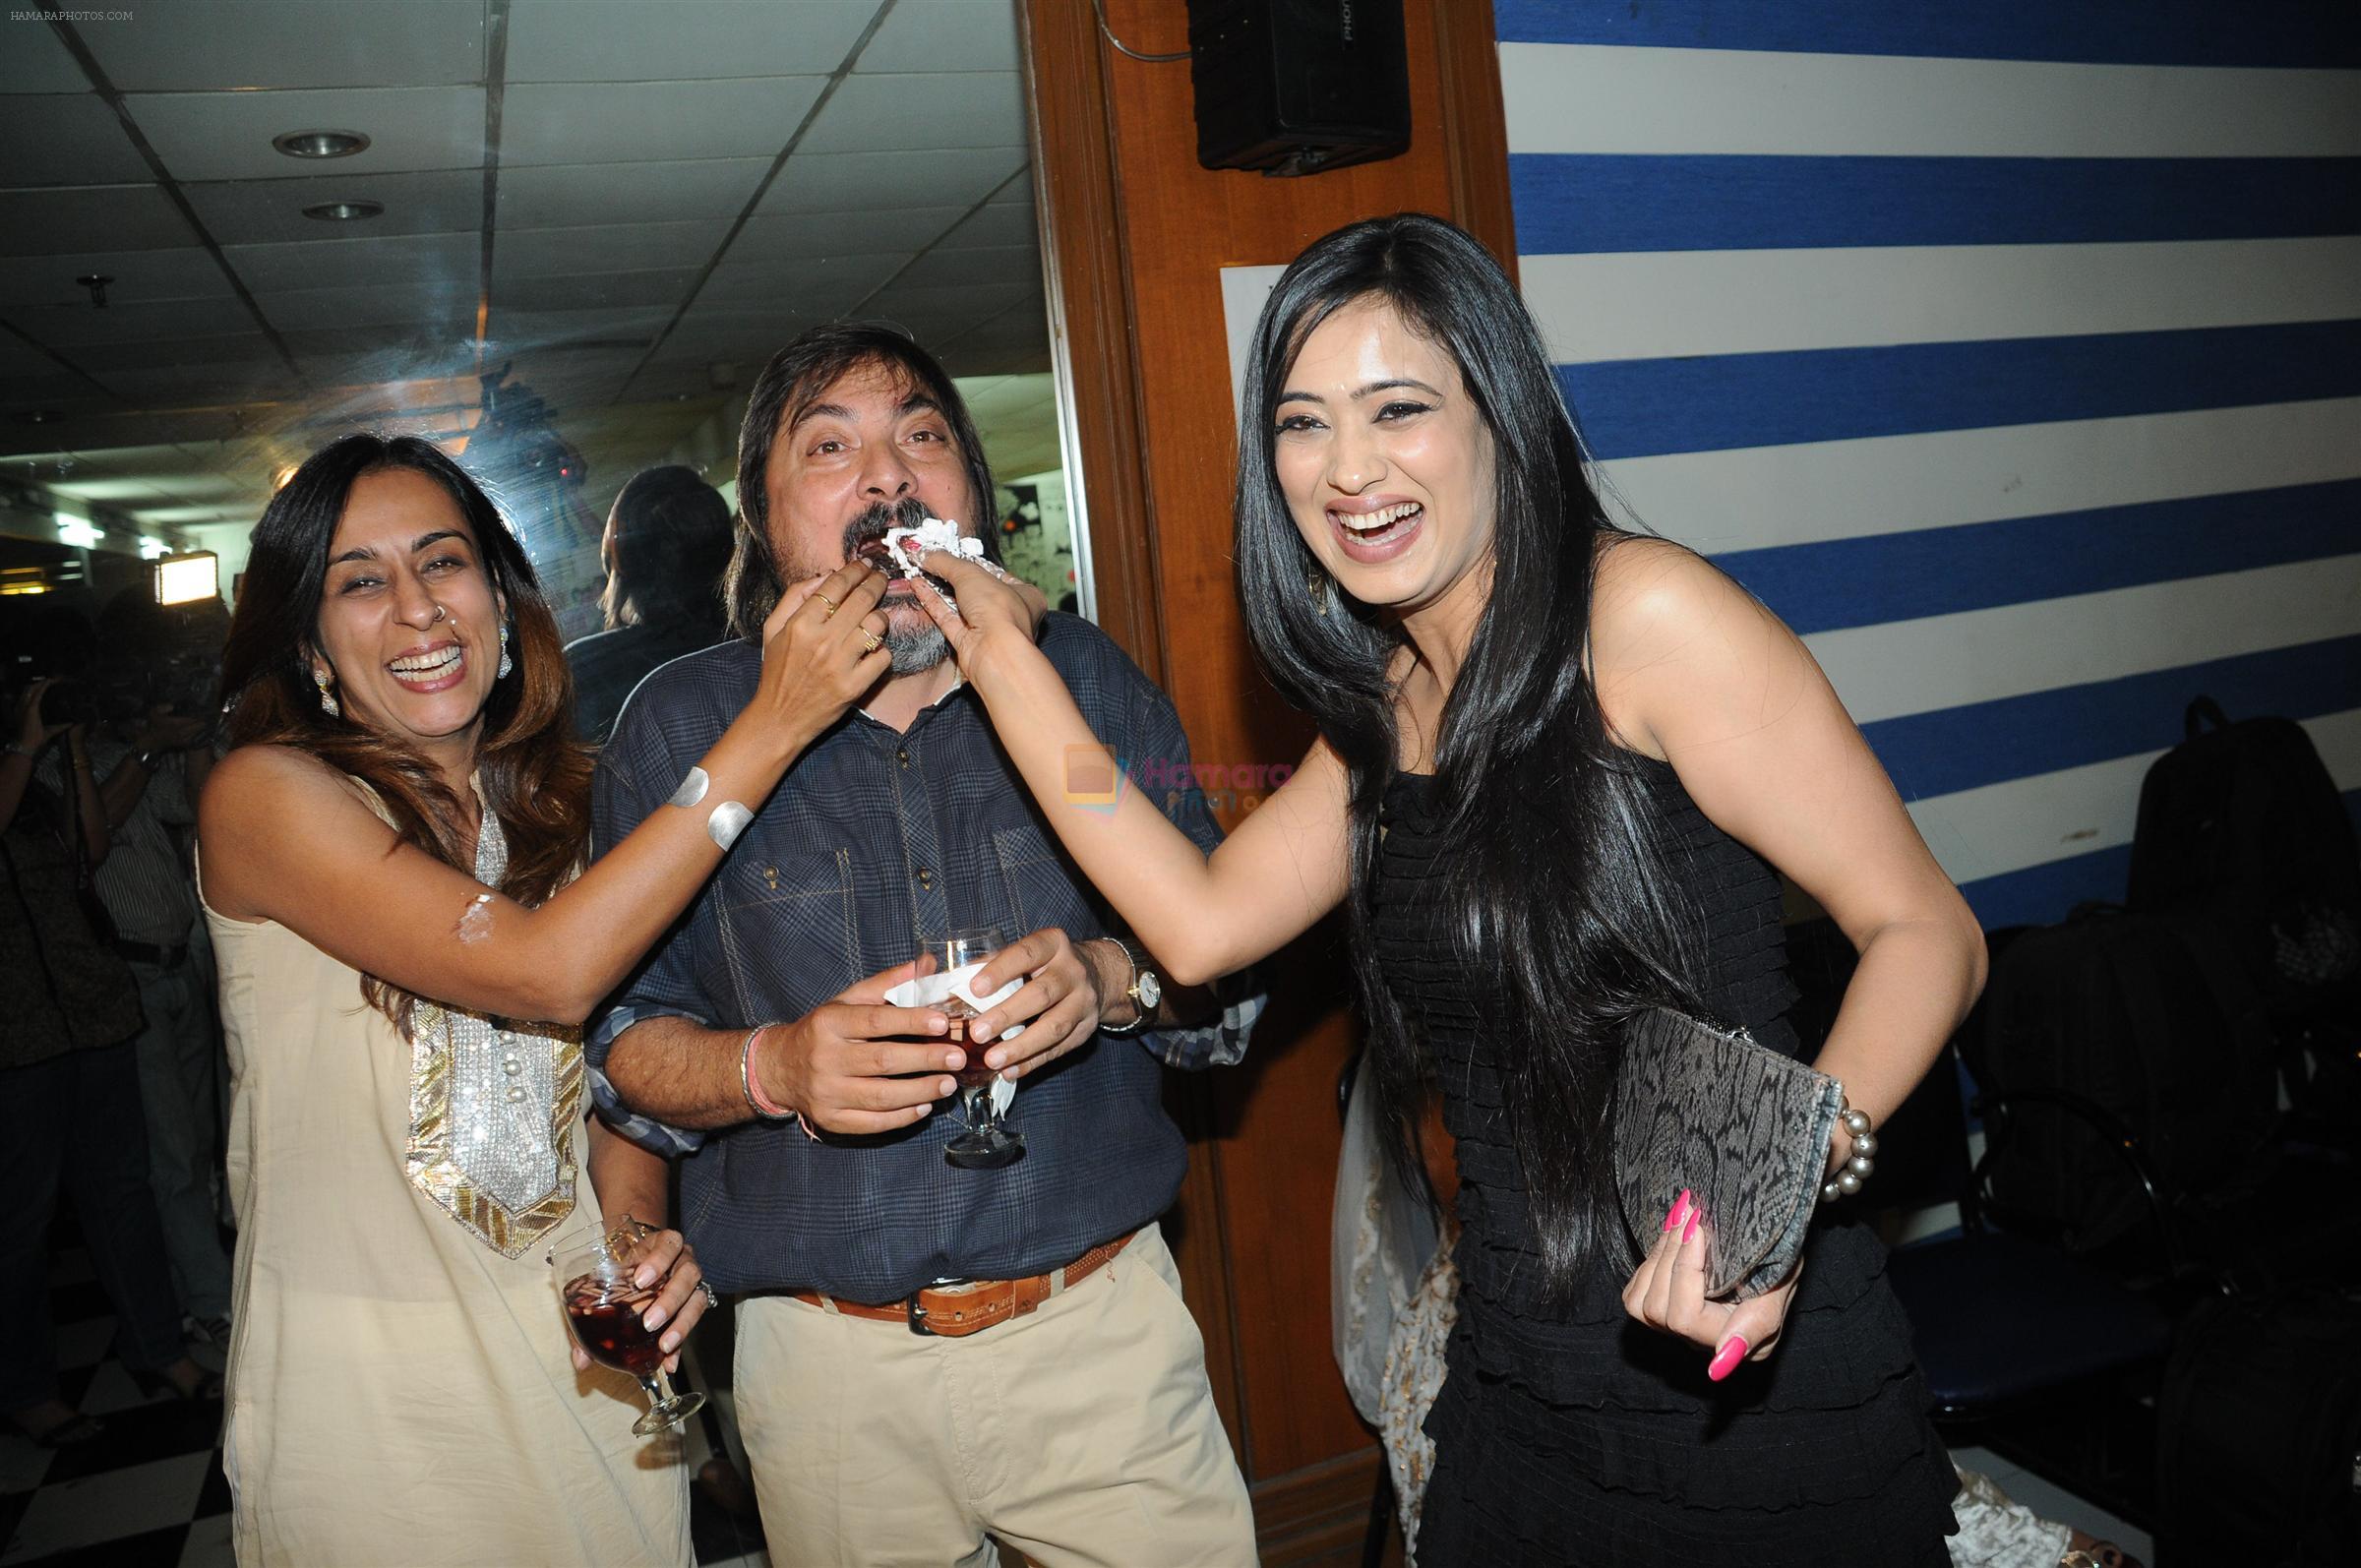 Deeya and Tony singh with Shweta Tewari at the Celebration of the Completion Party of 100 Episodes of PARVARISH�..kuch khatti kuch meethi in bowling alley on 7th April 2012